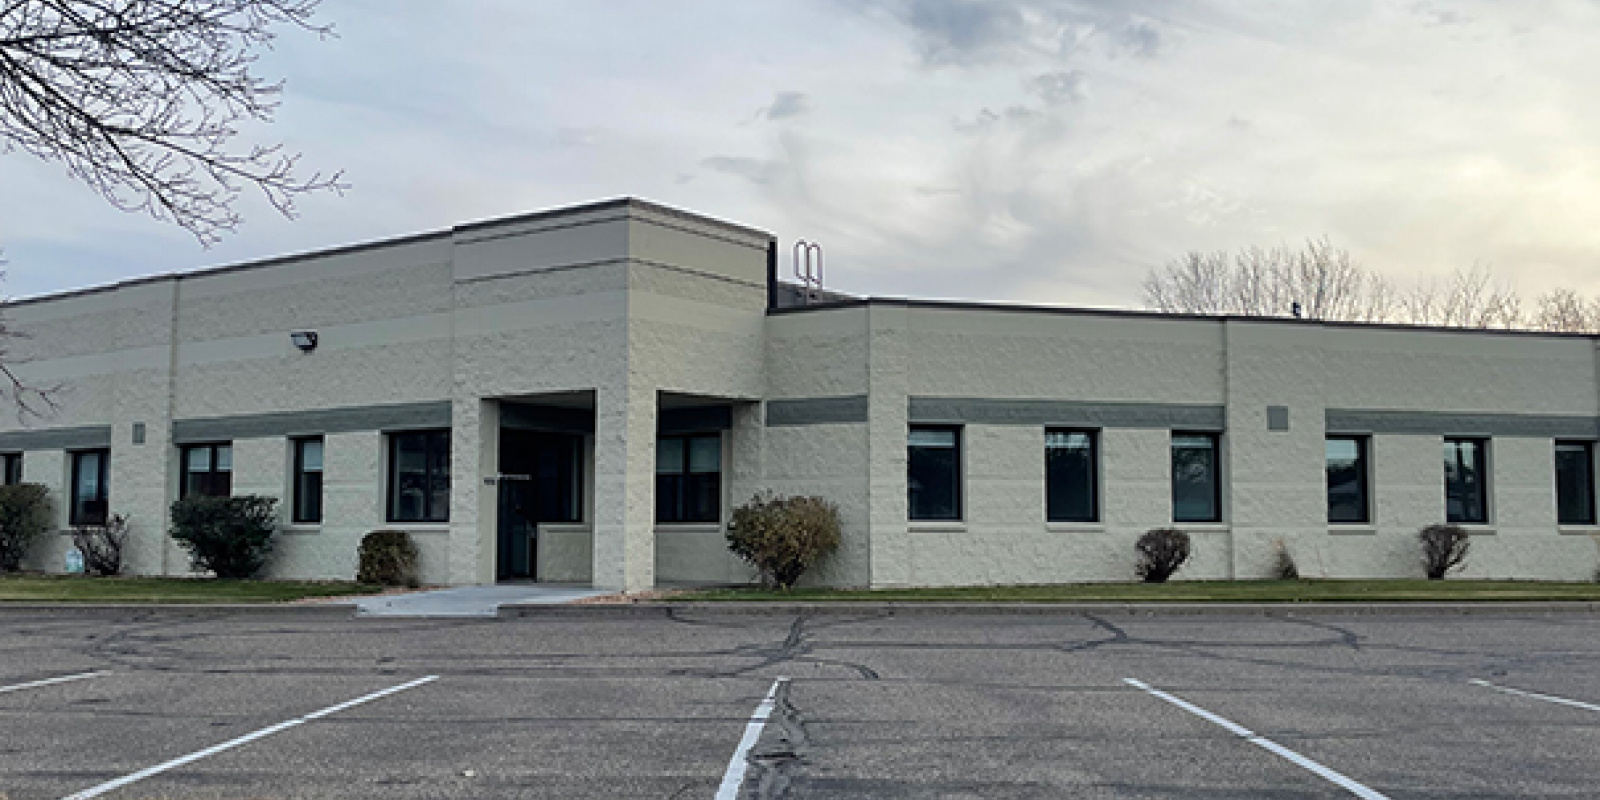 Office for lease, warehouse for lease, Sauk Rapids, MN